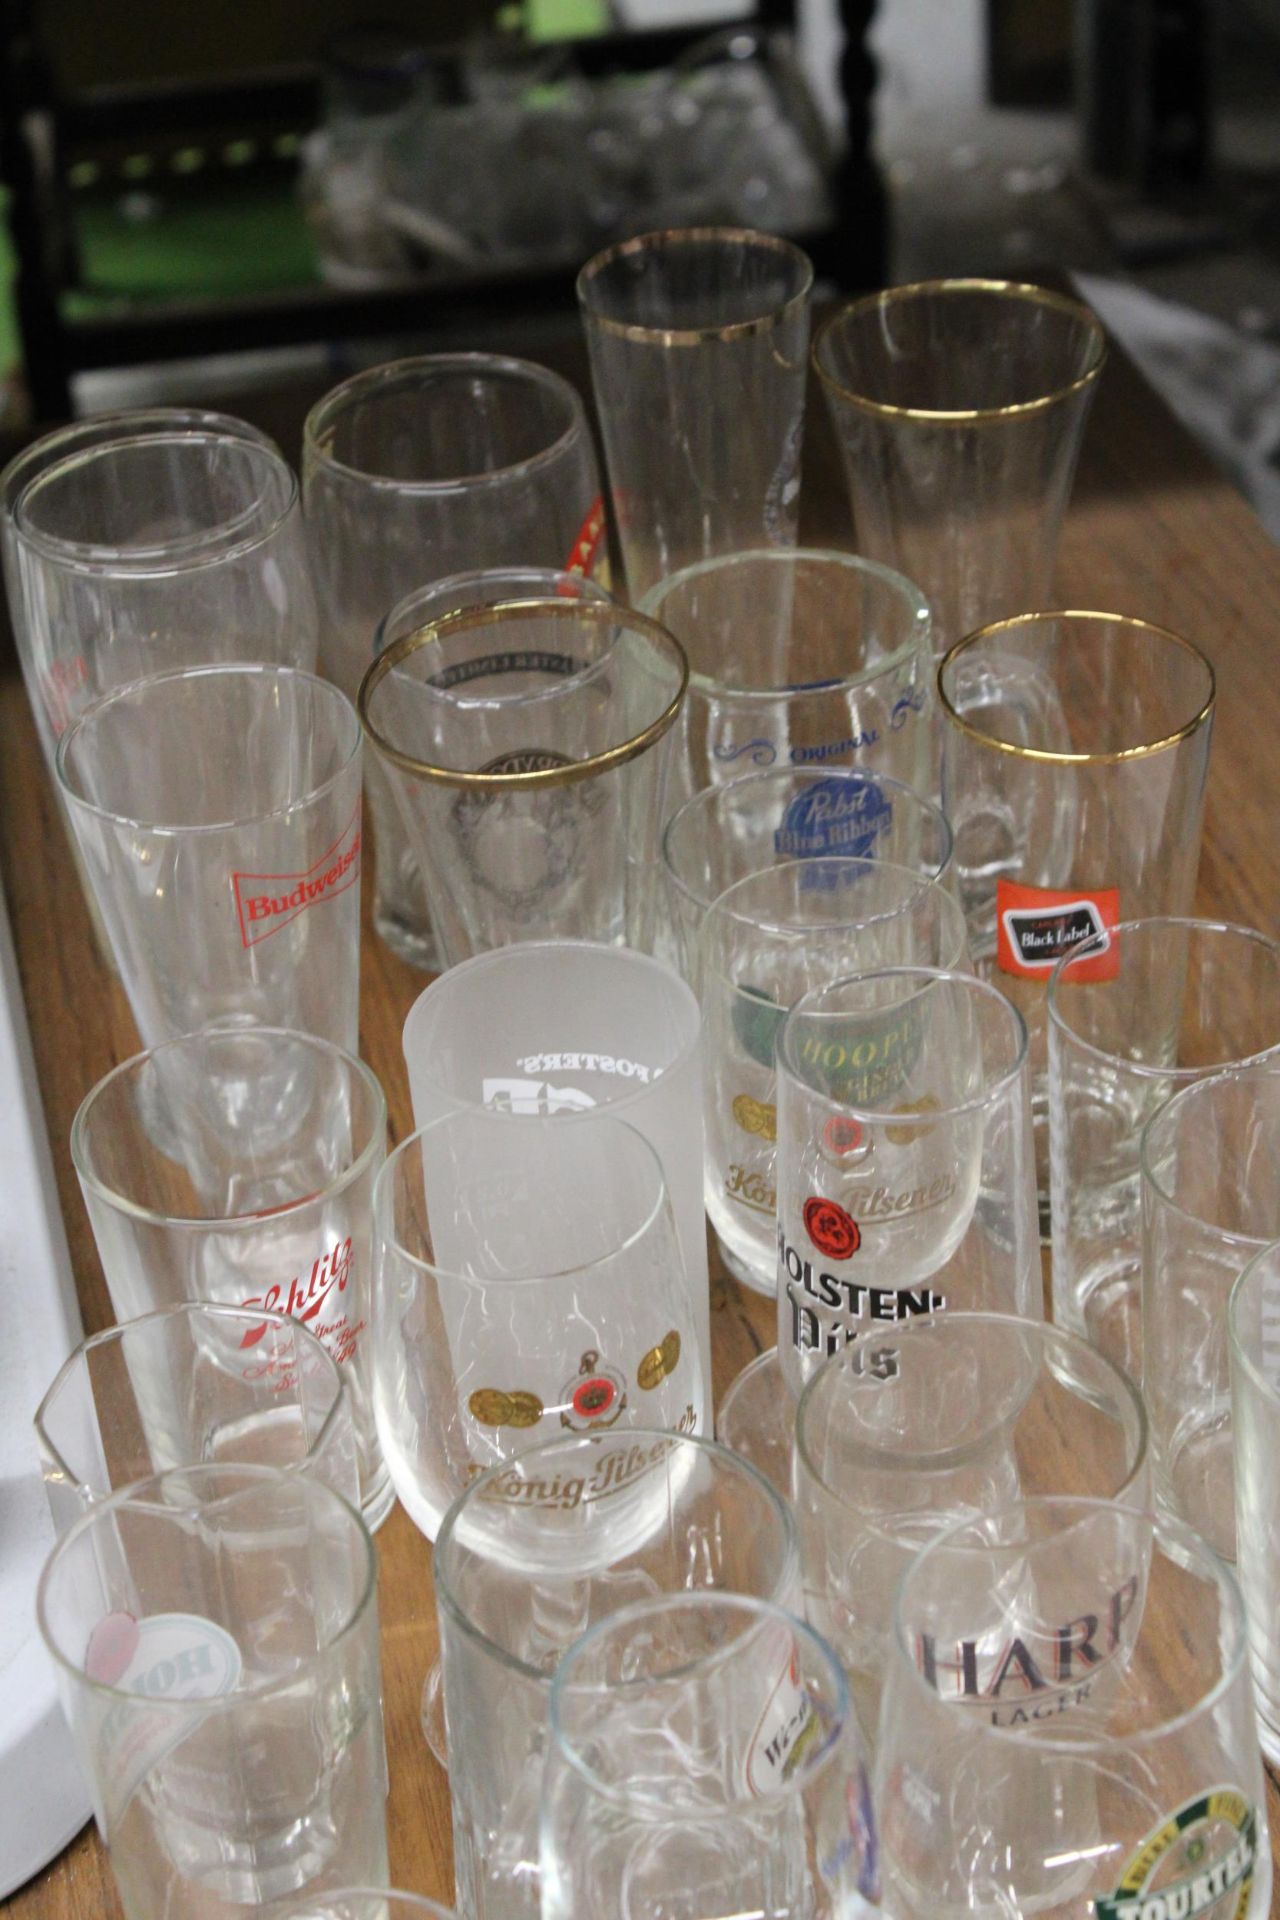 A LARGE QUANTITY OF BRANDY BEER GLASSES, TUMBLERS, ETC - Image 5 of 5